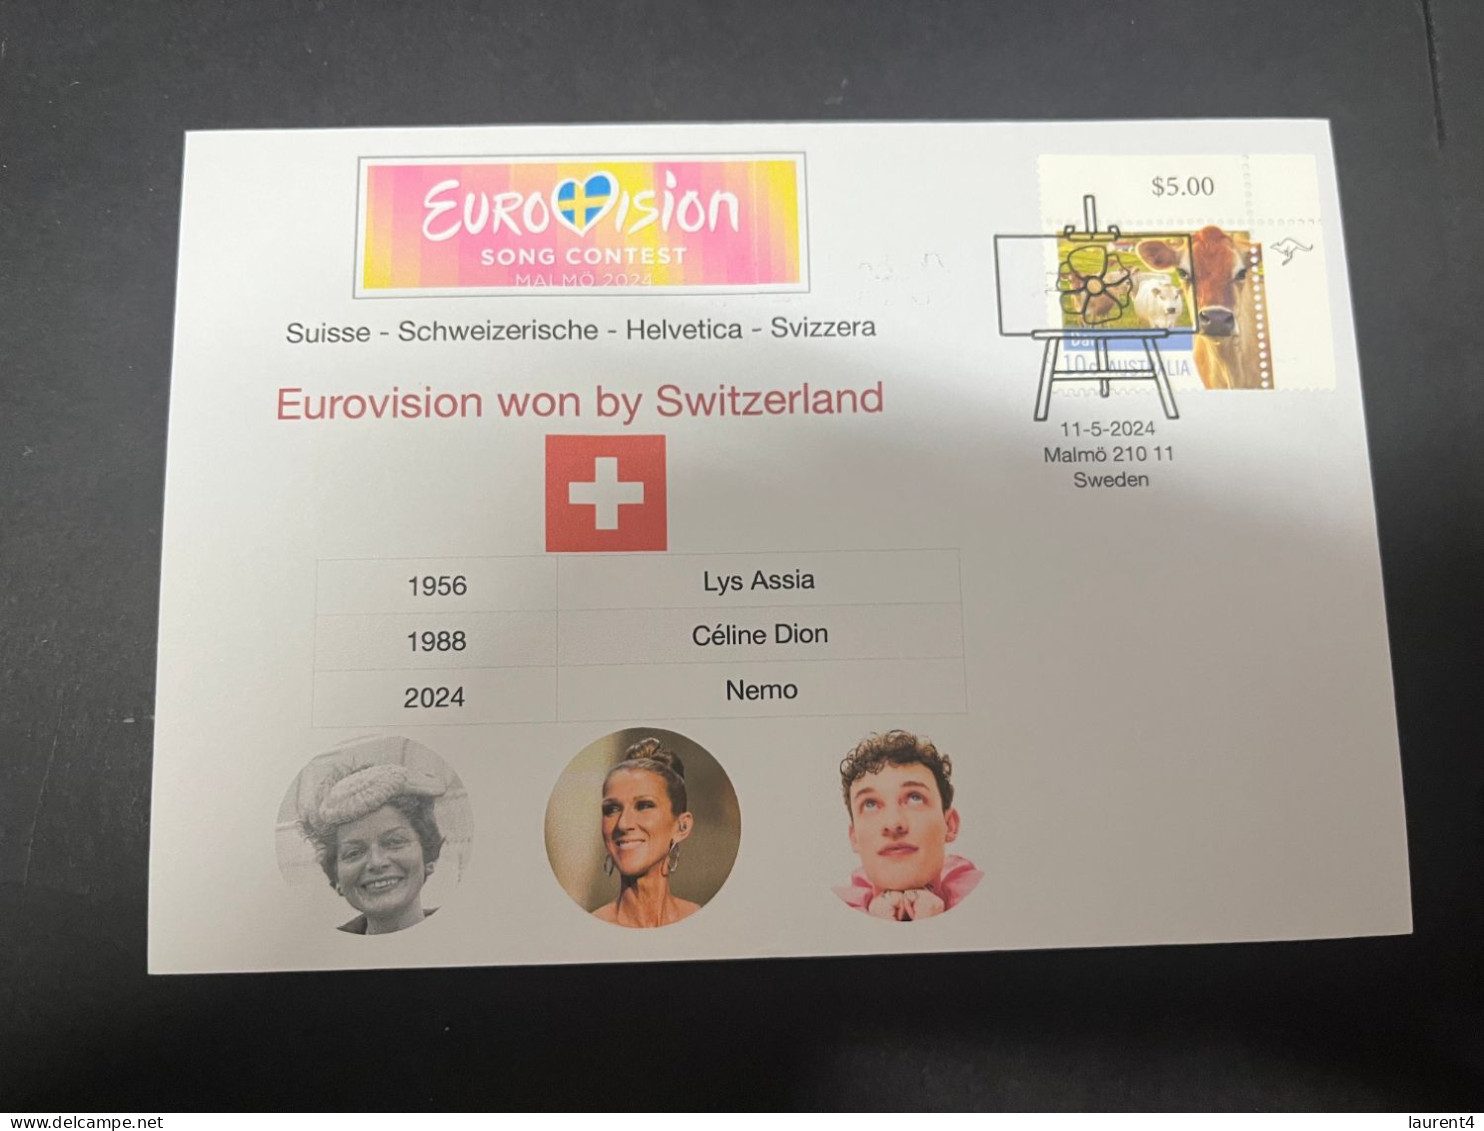 13-5-2024 (5 Z 2) Eurovision Song Contest 2024 - 1st (3rd Win For Switzerland) 1956 Lys Assia - 1988 Céline Dion - Musik